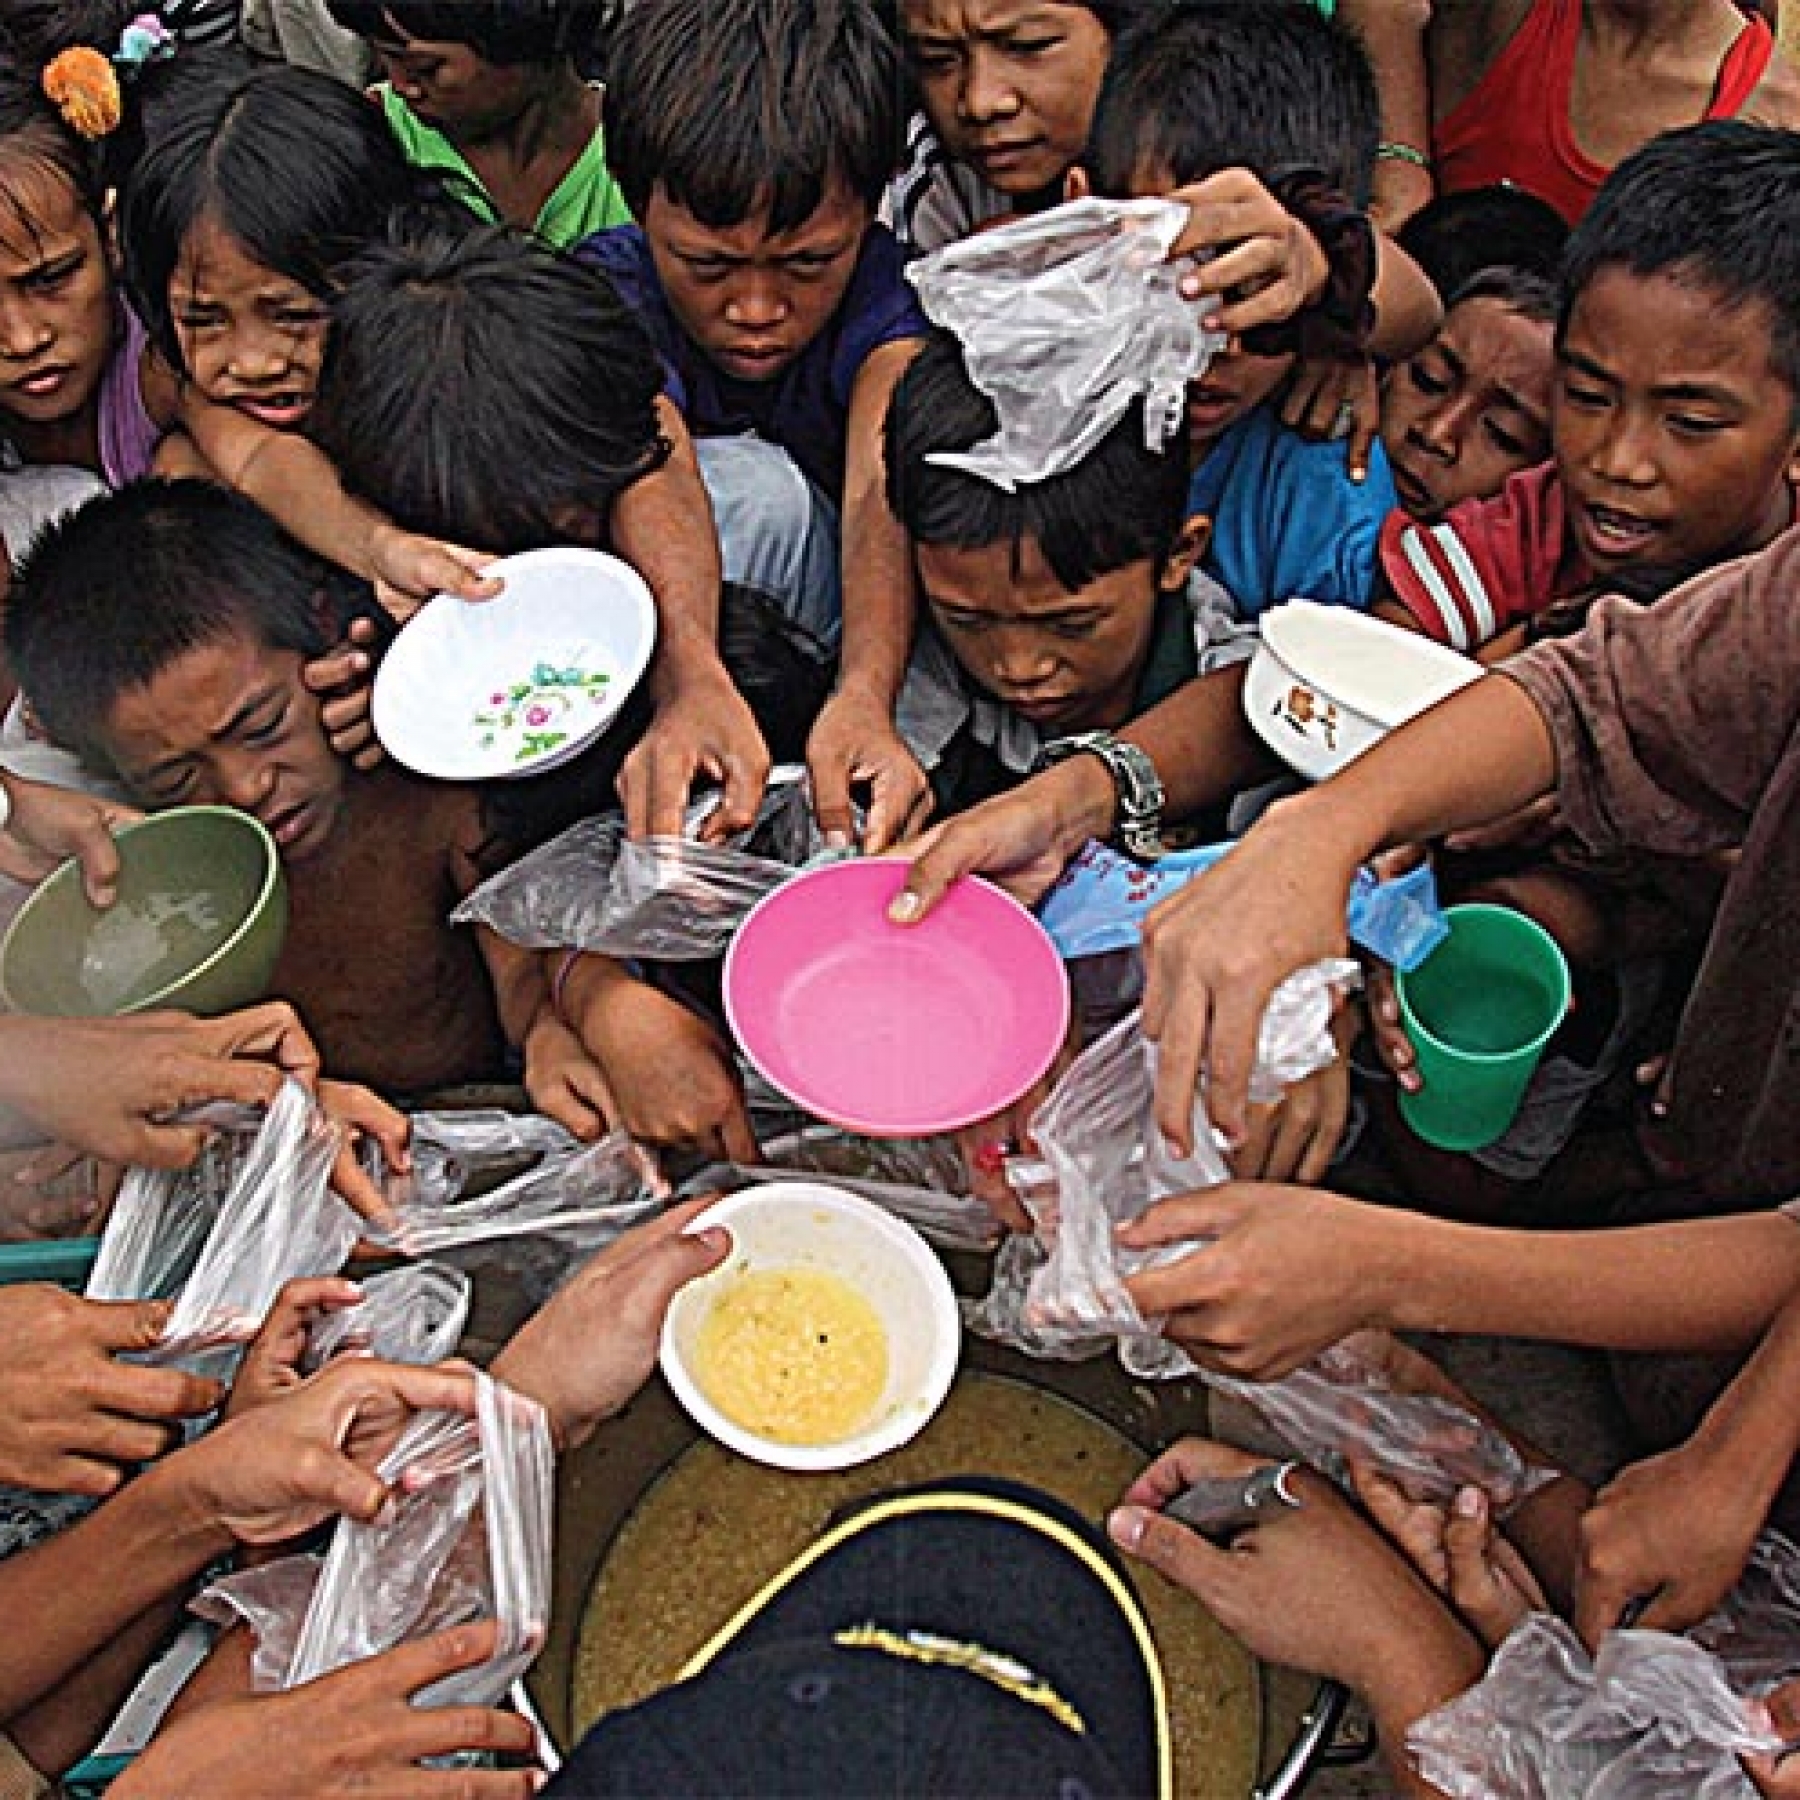 The Philippines' food worries